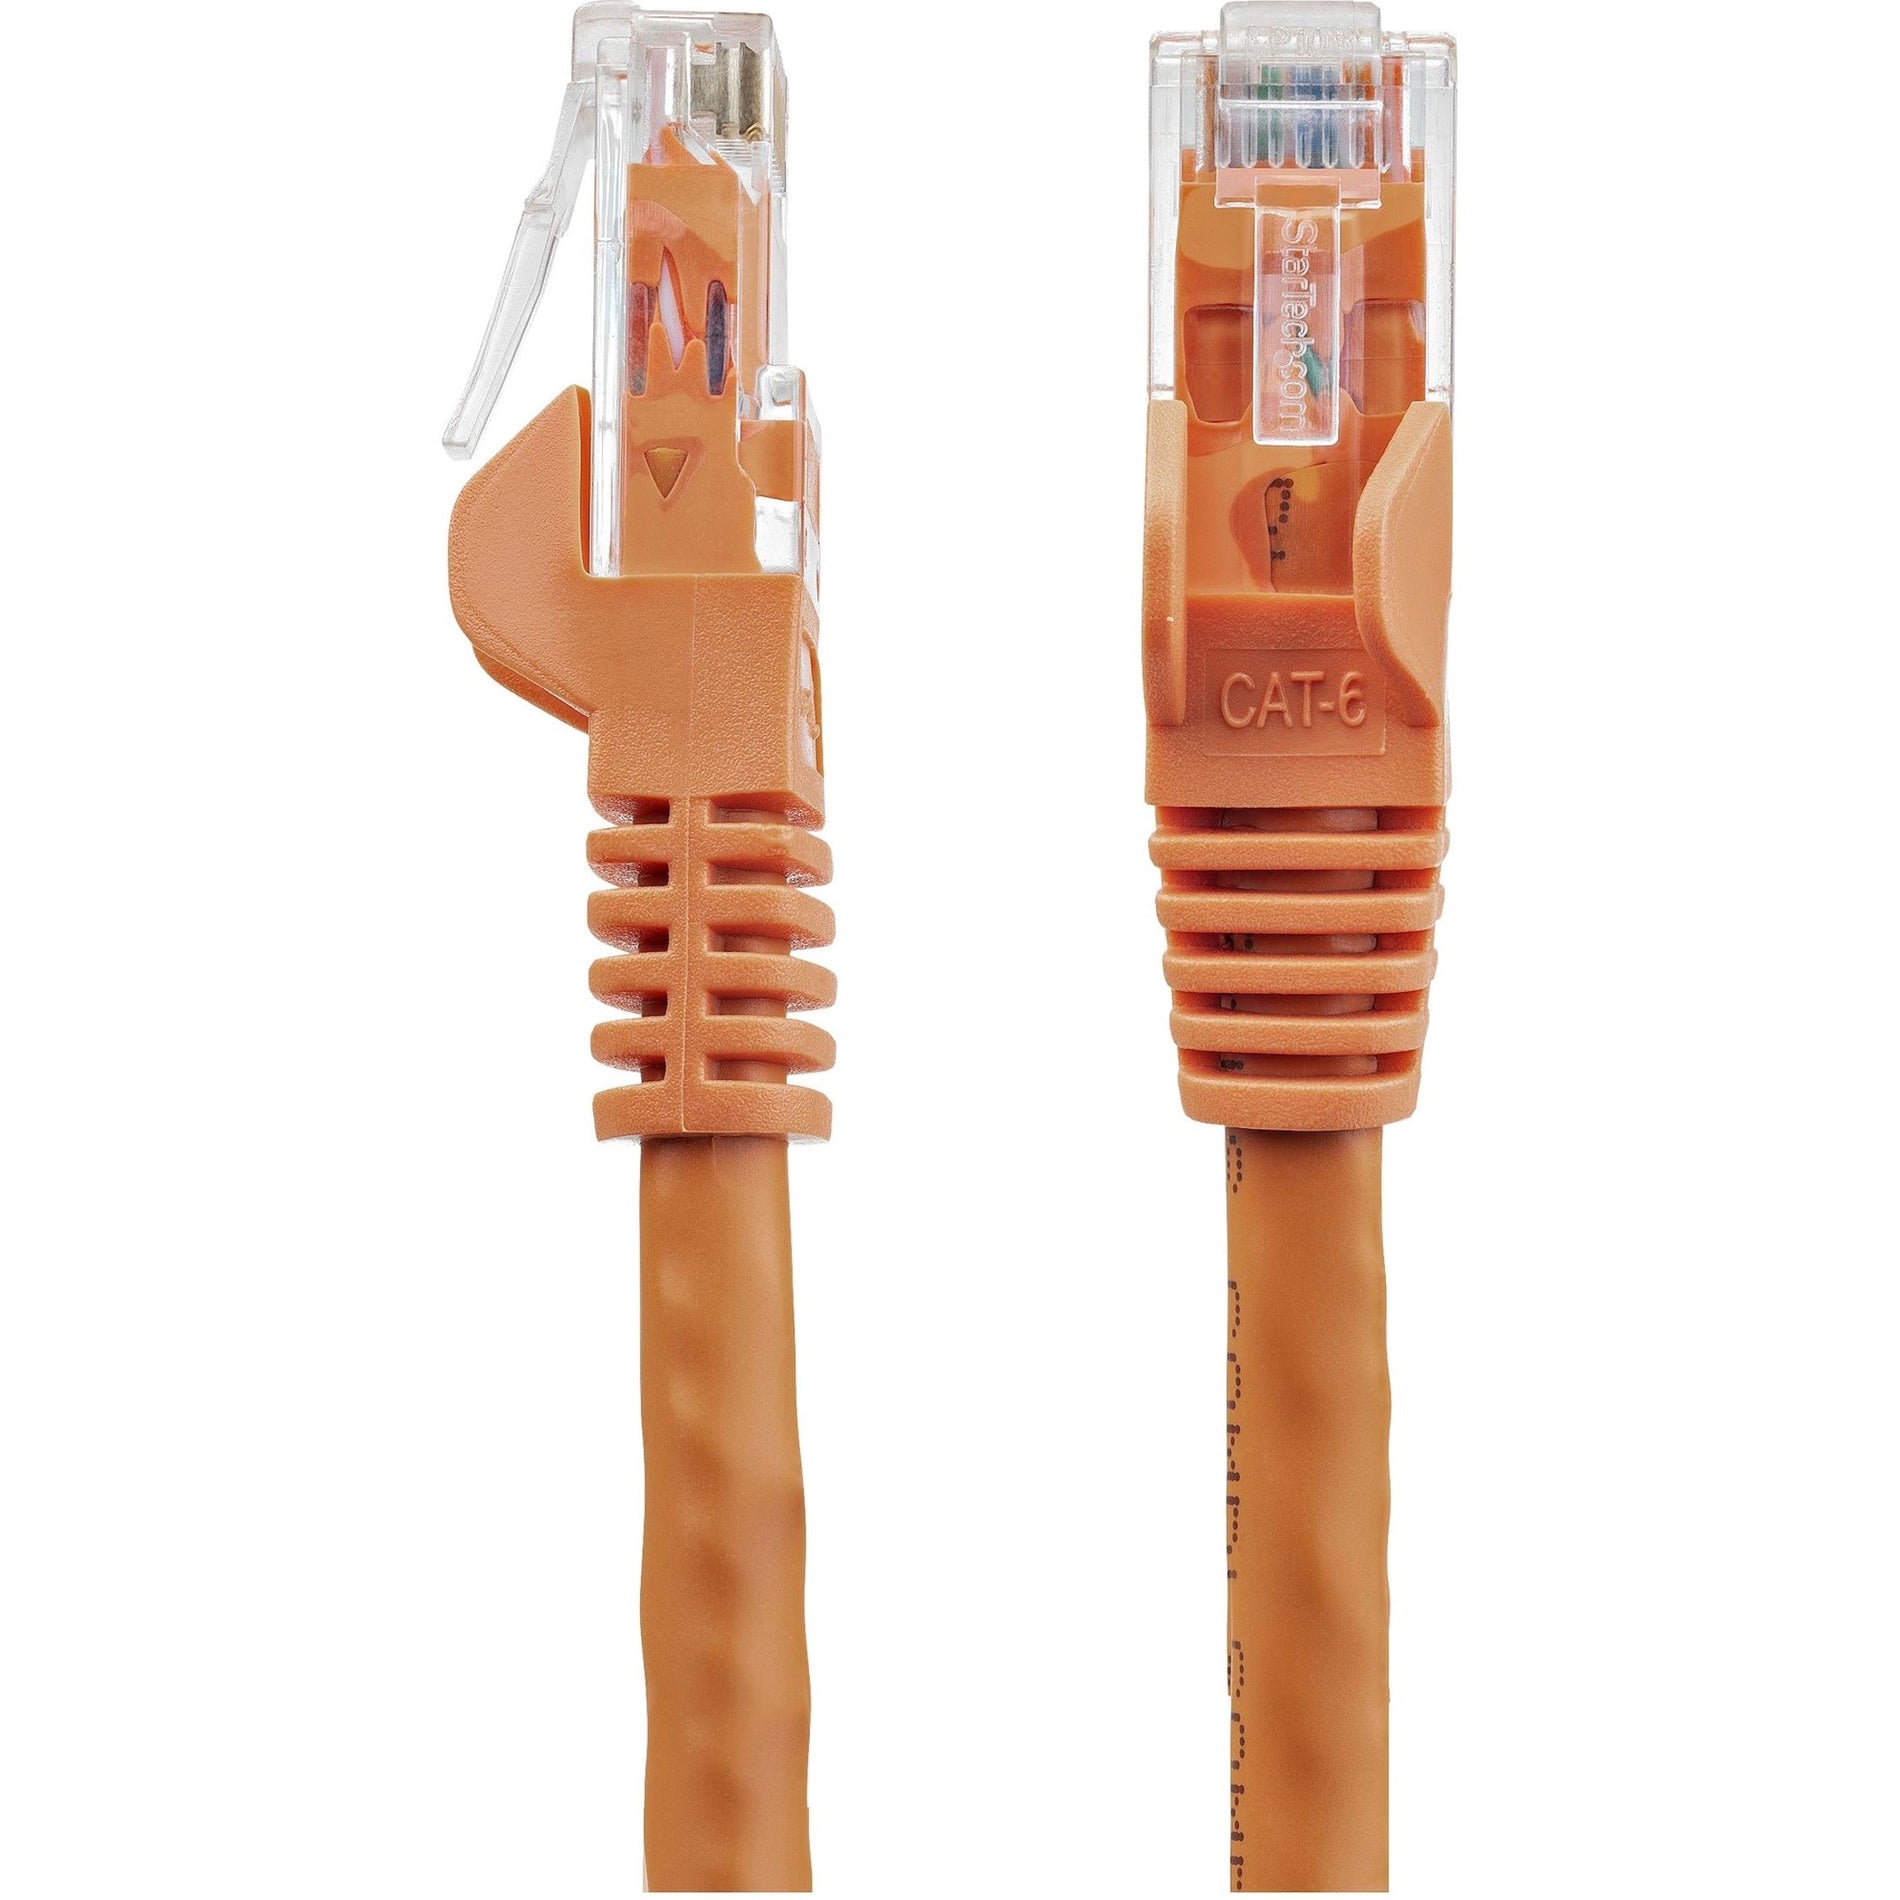 StarTech.com N6PATCH3OR 3 ft Orange Snagless Cat6 UTP Patch Cable, Lifetime Warranty, 10 Gbit/s Data Transfer Rate